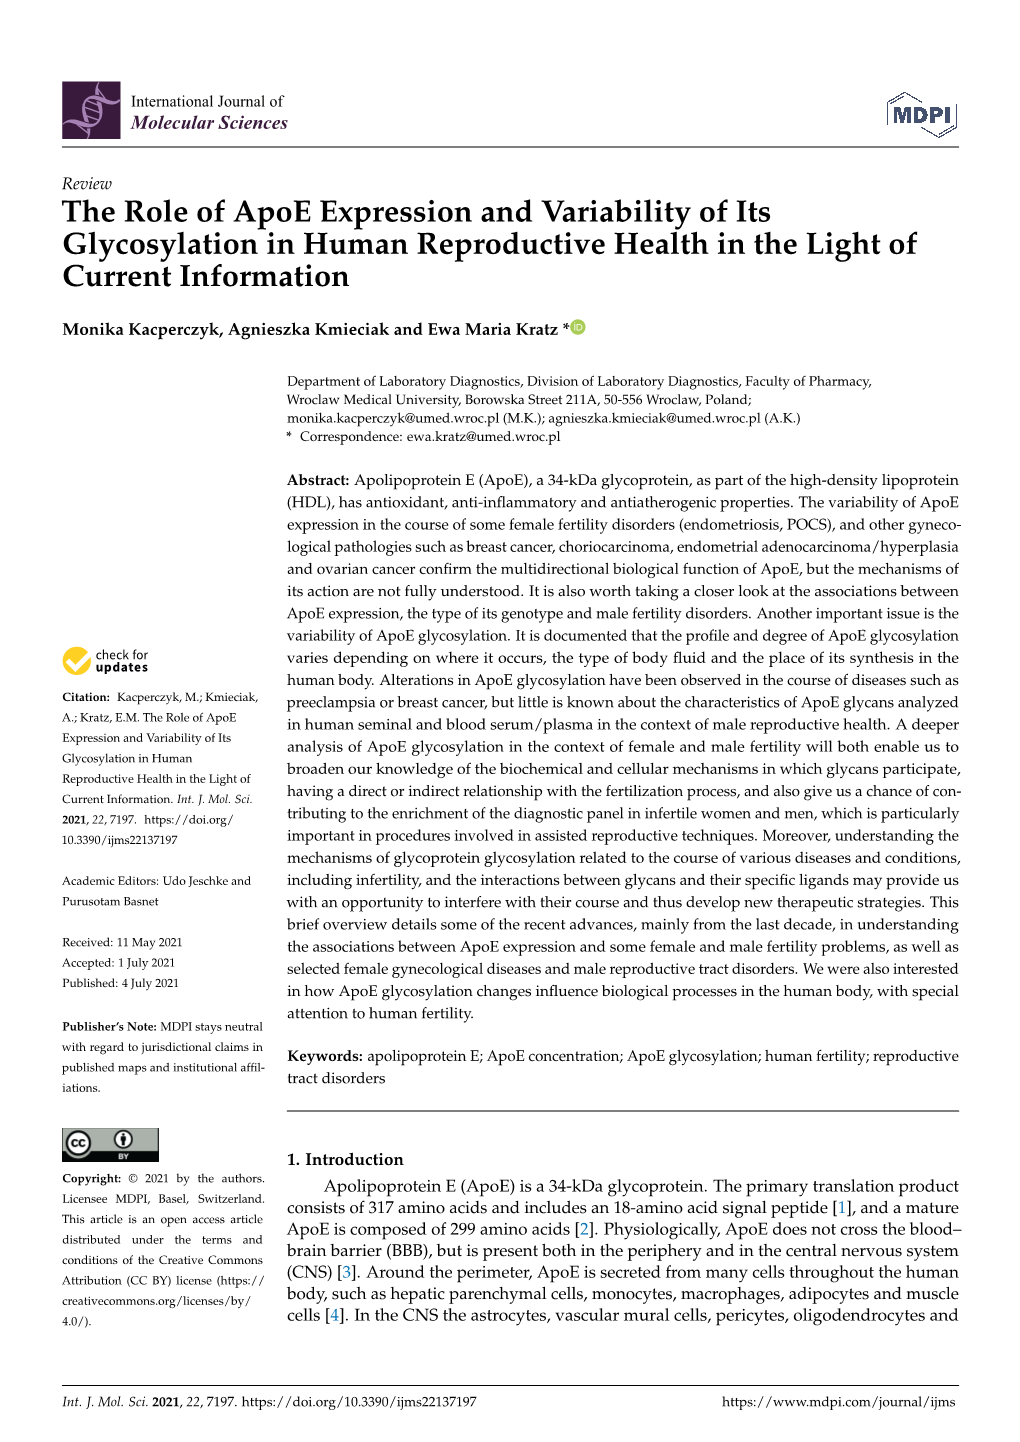 The Role of Apoe Expression and Variability of Its Glycosylation in Human Reproductive Health in the Light of Current Information